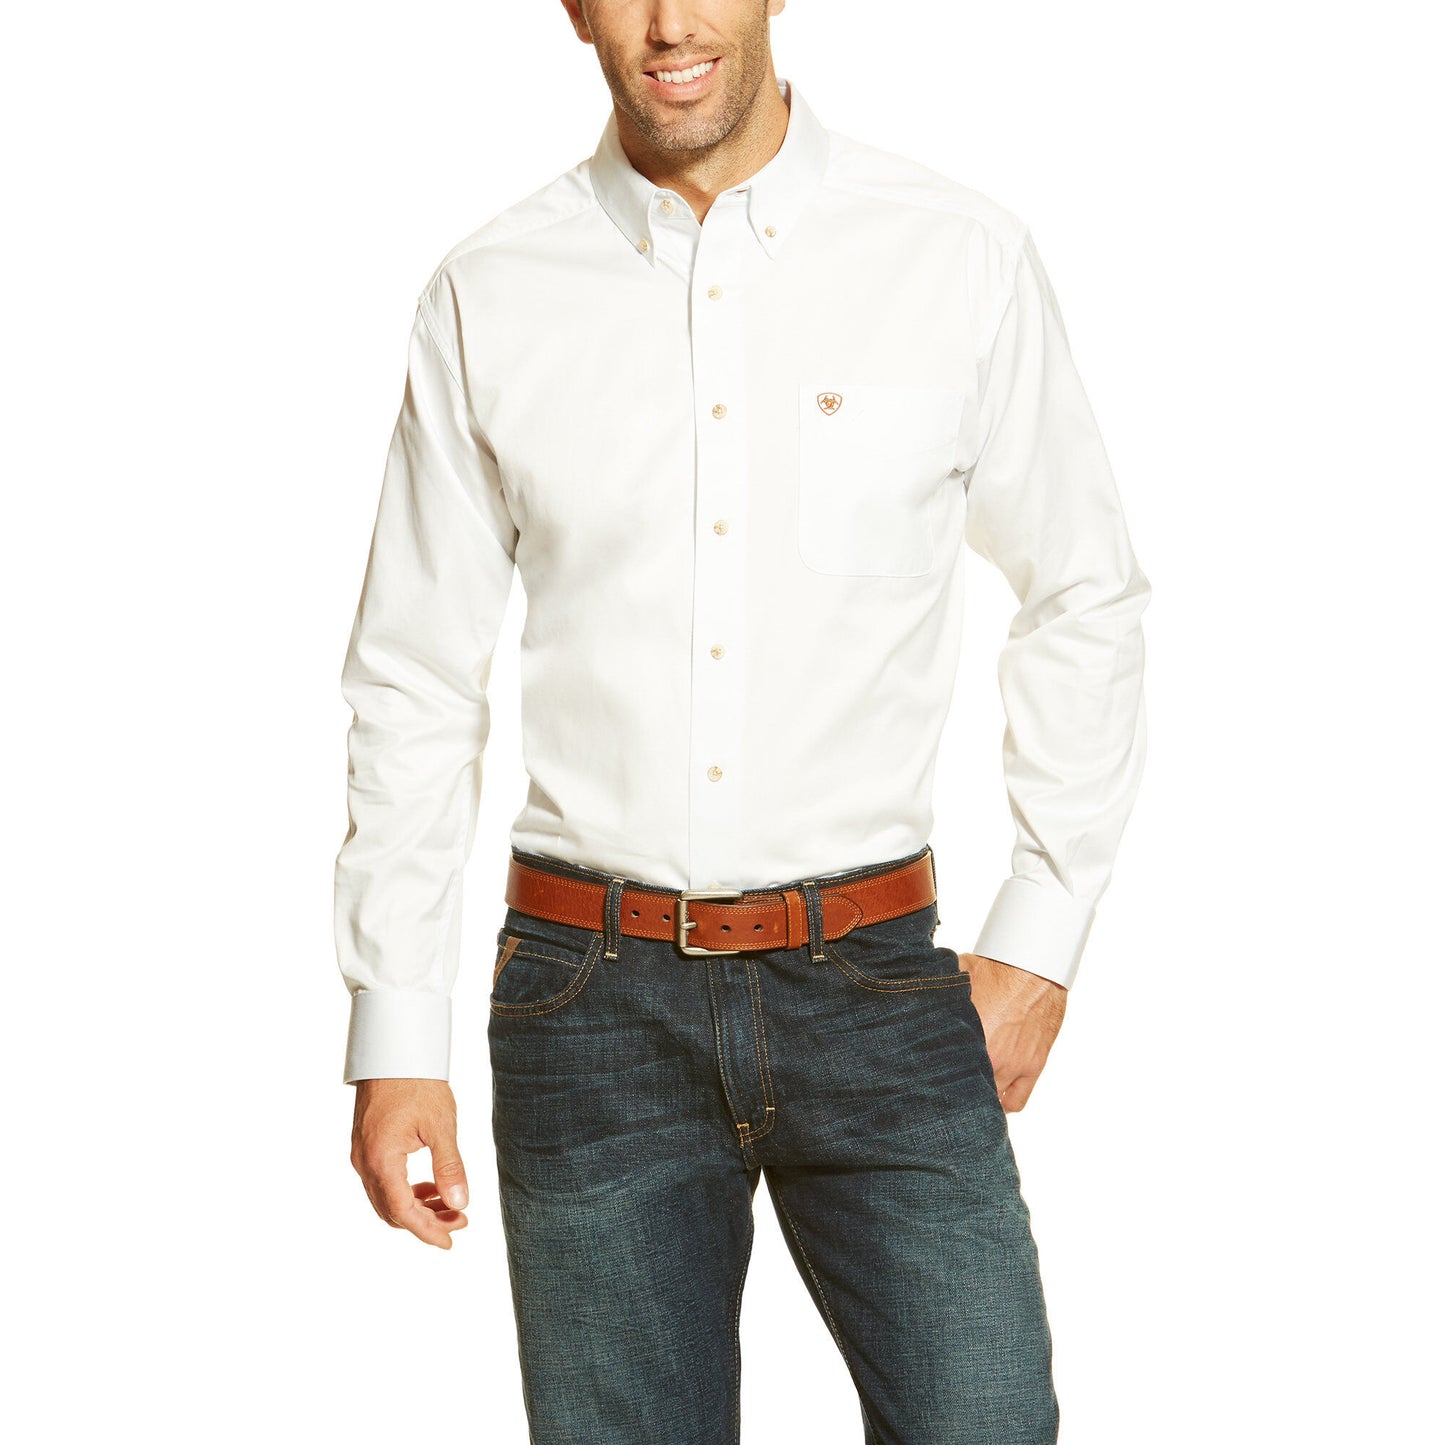 Ariat Men's Solid Twill Shirt - White - French's Boots